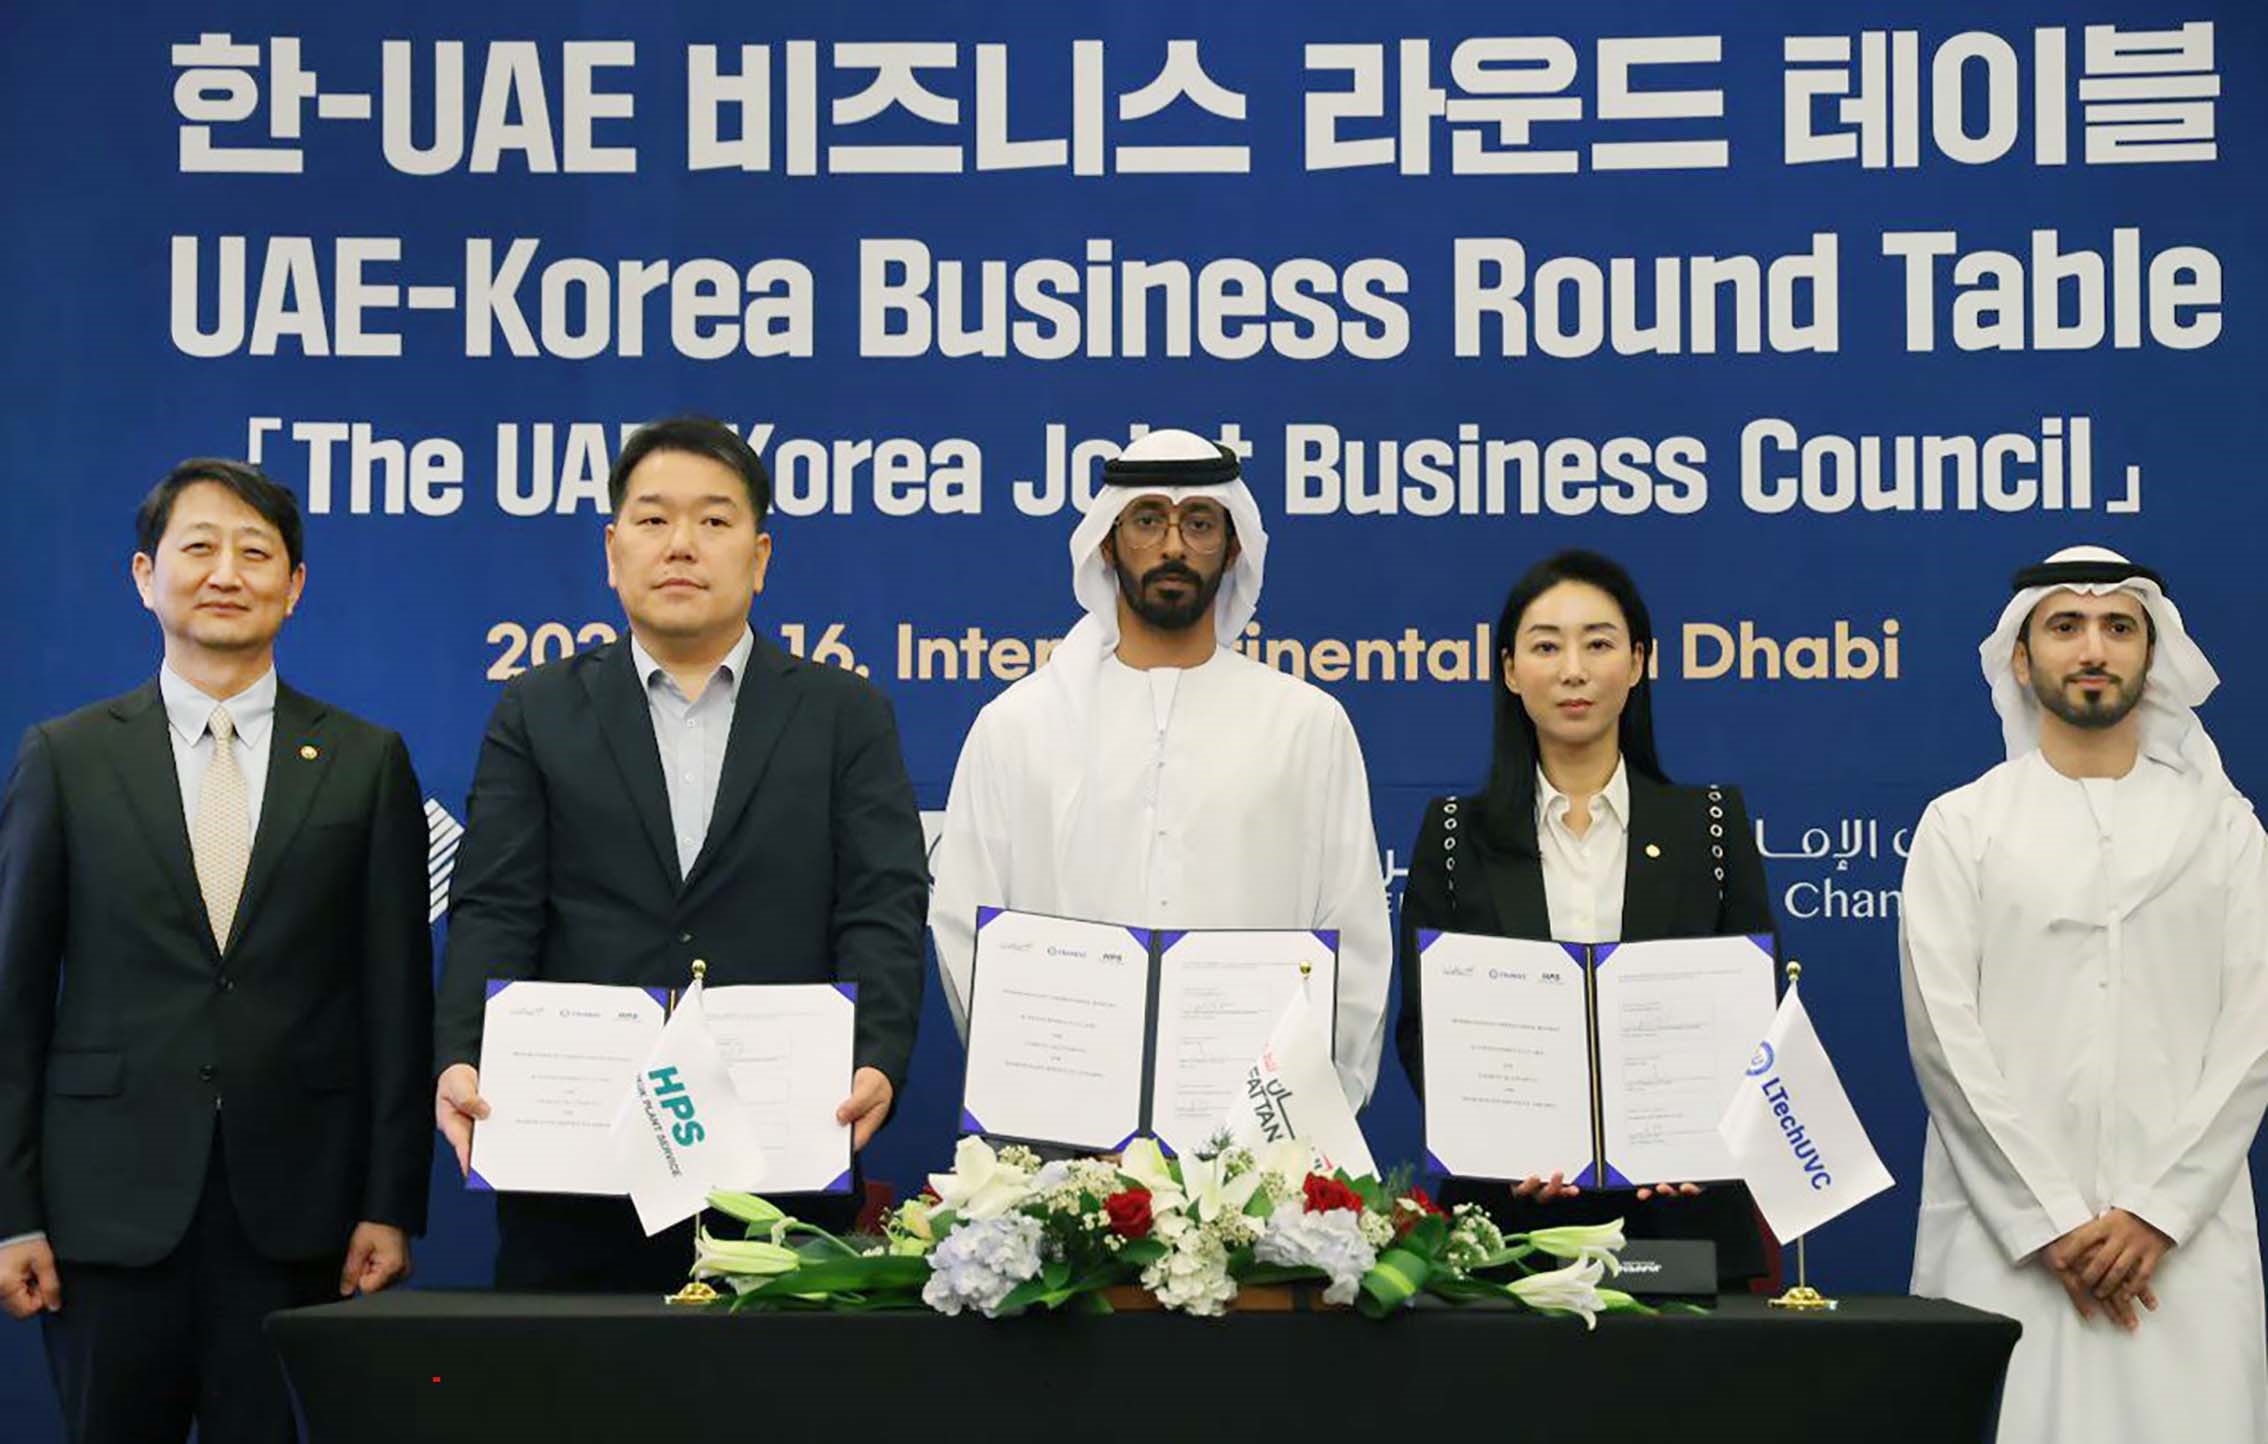 Trade Minister attends Korea-UAE Business Roundtable Image 1